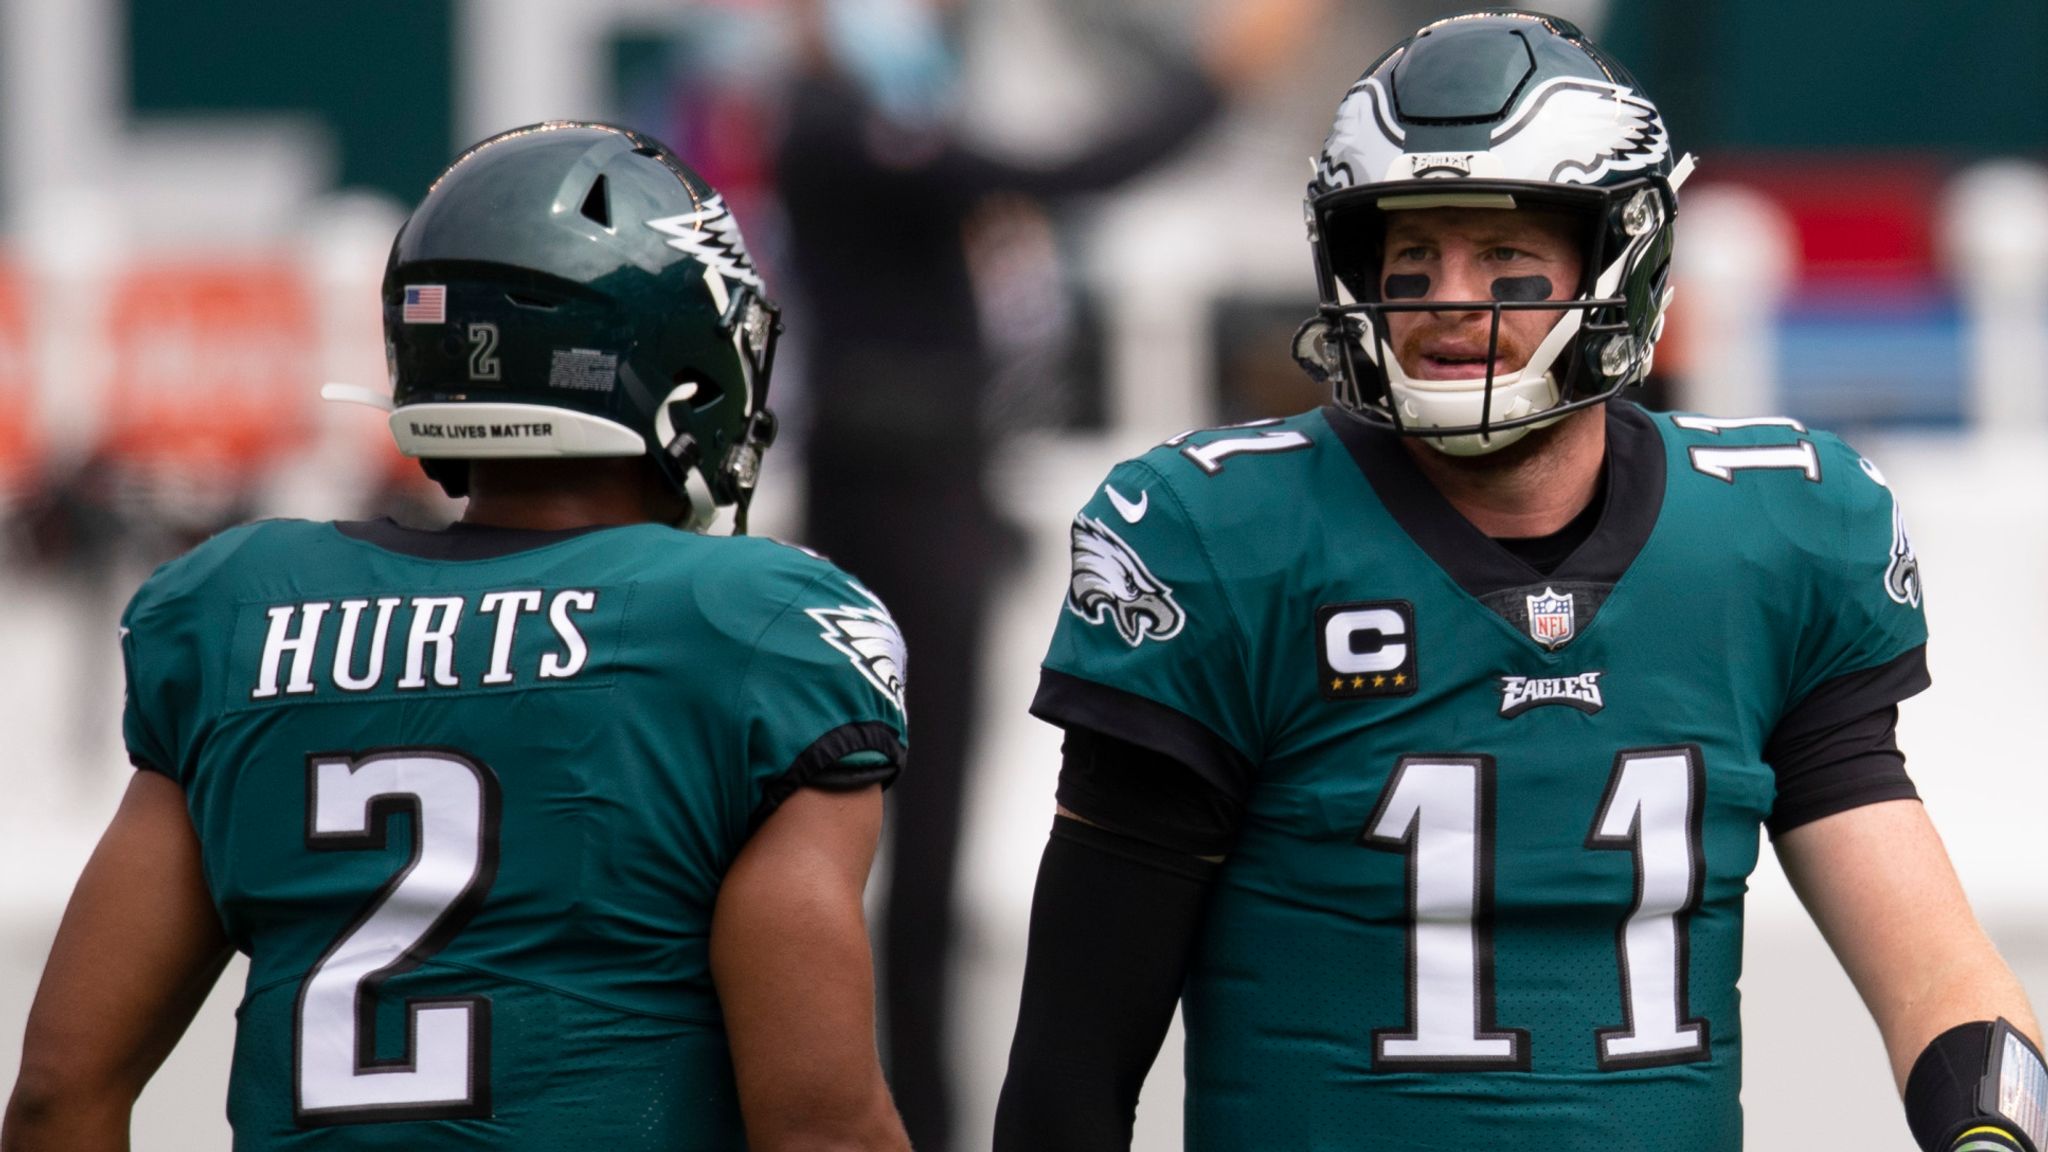 Eagles Sirianni Says They’ll Be Competition Between QB’s Wentz and Hurts